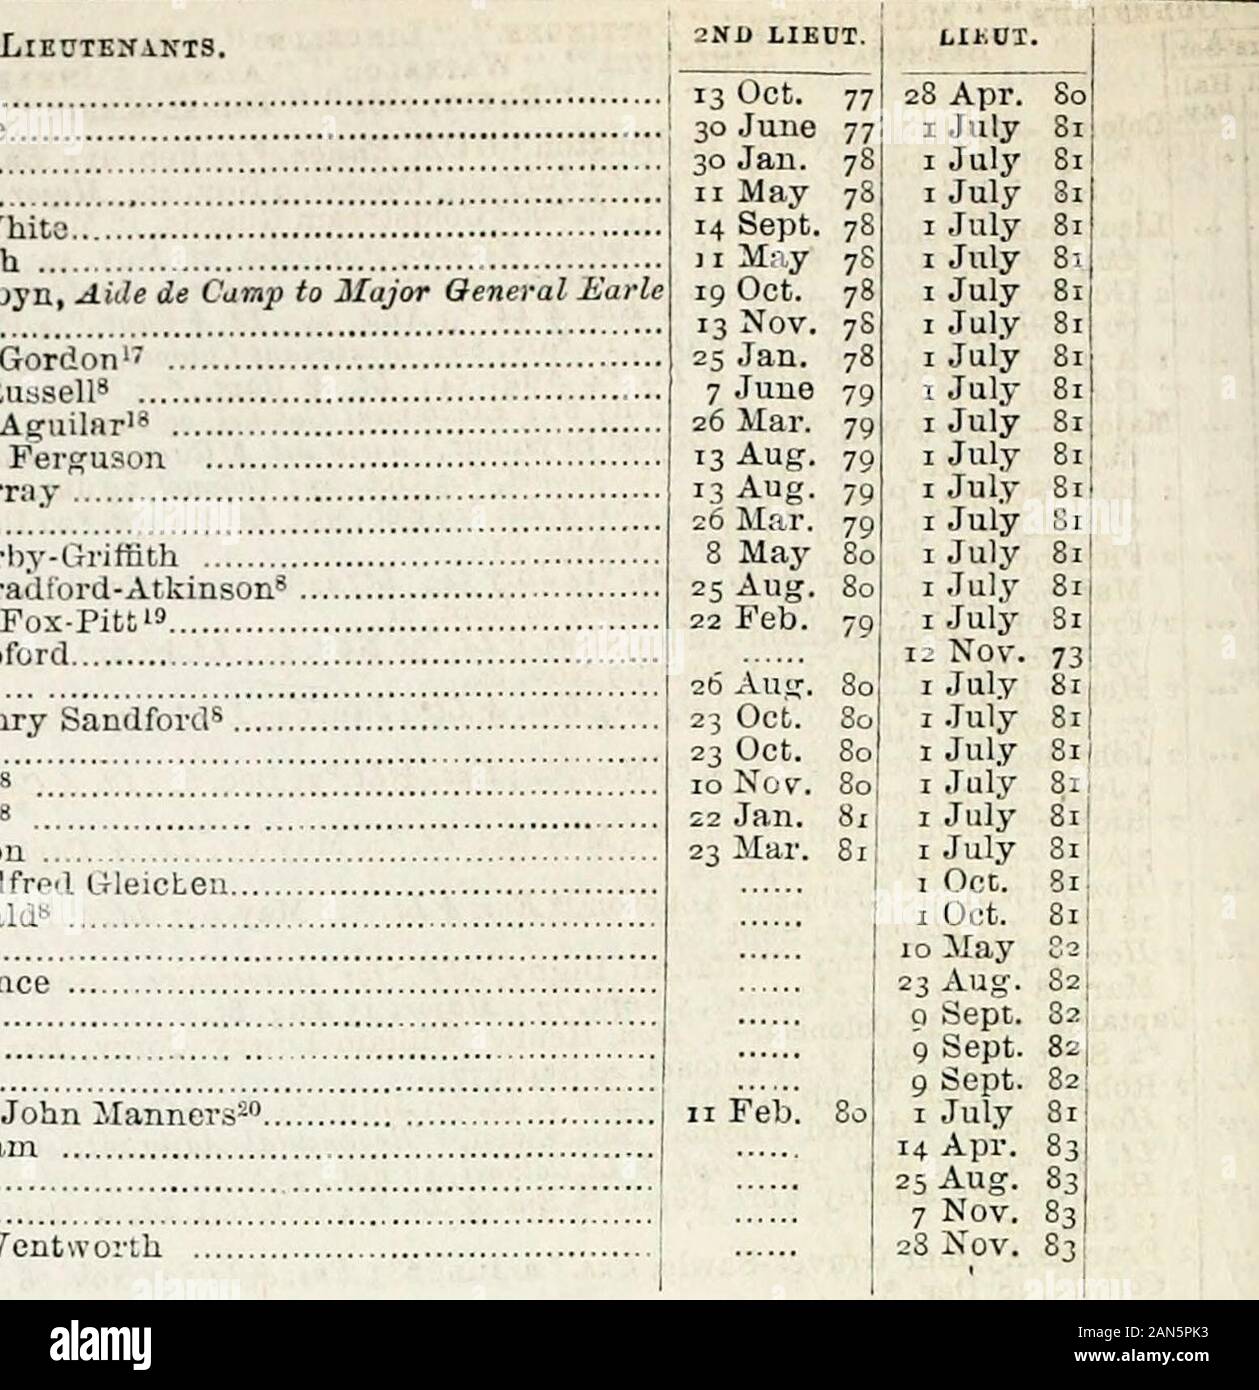 The new annual army list, militia list, yeomanry cavalry list, and Indian civil service list . Foster8 1 28 Oct. 3 Hon. Frederick William Stopford,12 at Staff College I 28 Oct. Henry Chalouer Smith i 28 Oct. 2 Hon. Charles Robert William Colville, 3/asto- ofColoille™ | 28 Oct. 1 Francis Cecil Ricardo, Adjutant 7 Aug. 80 ] 11 Sept. 1 Harry James Craufurd, Regimental Adjutant 1 July Si [ 29 Mar. 2 Henry Paulet St. John Mildmay8 ; 24 July 2 Lewis Vivian Loyd8 j n Sept. 2 John Hunter Reynolds8 iS Mar. 1 Francis Lloyd 18 Mar. 1 Josceline FitzRoy Bagot, Aide de Camp to the Marquis of Lome 18 Mar. 1 Stock Photo